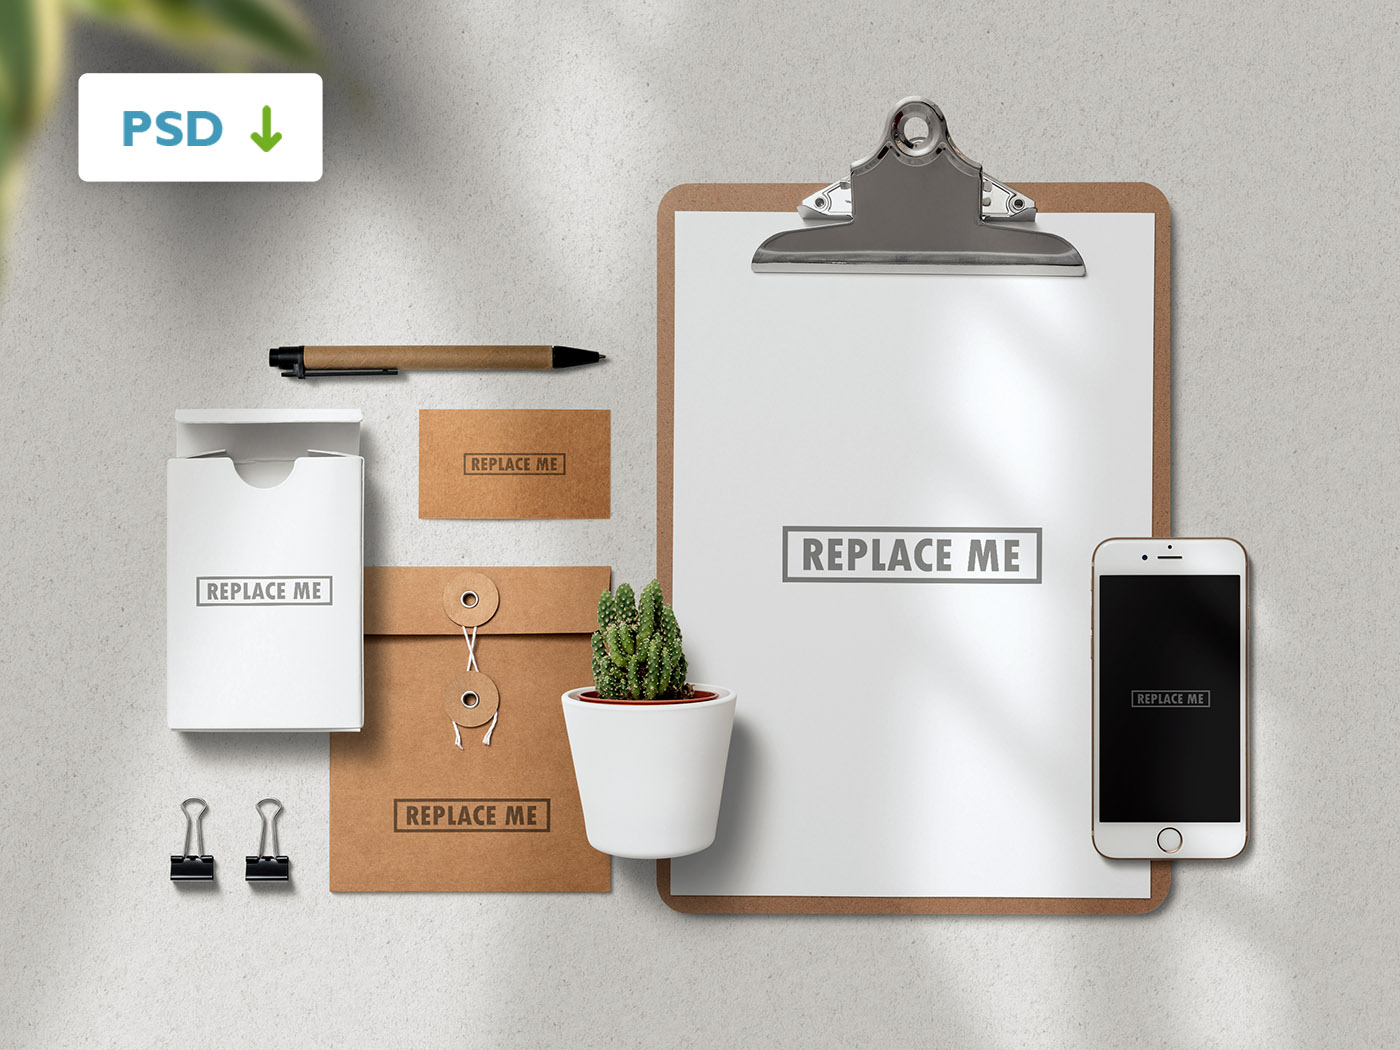 Download Stationery with Clipboard Mockup by Grapbox™ on Dribbble